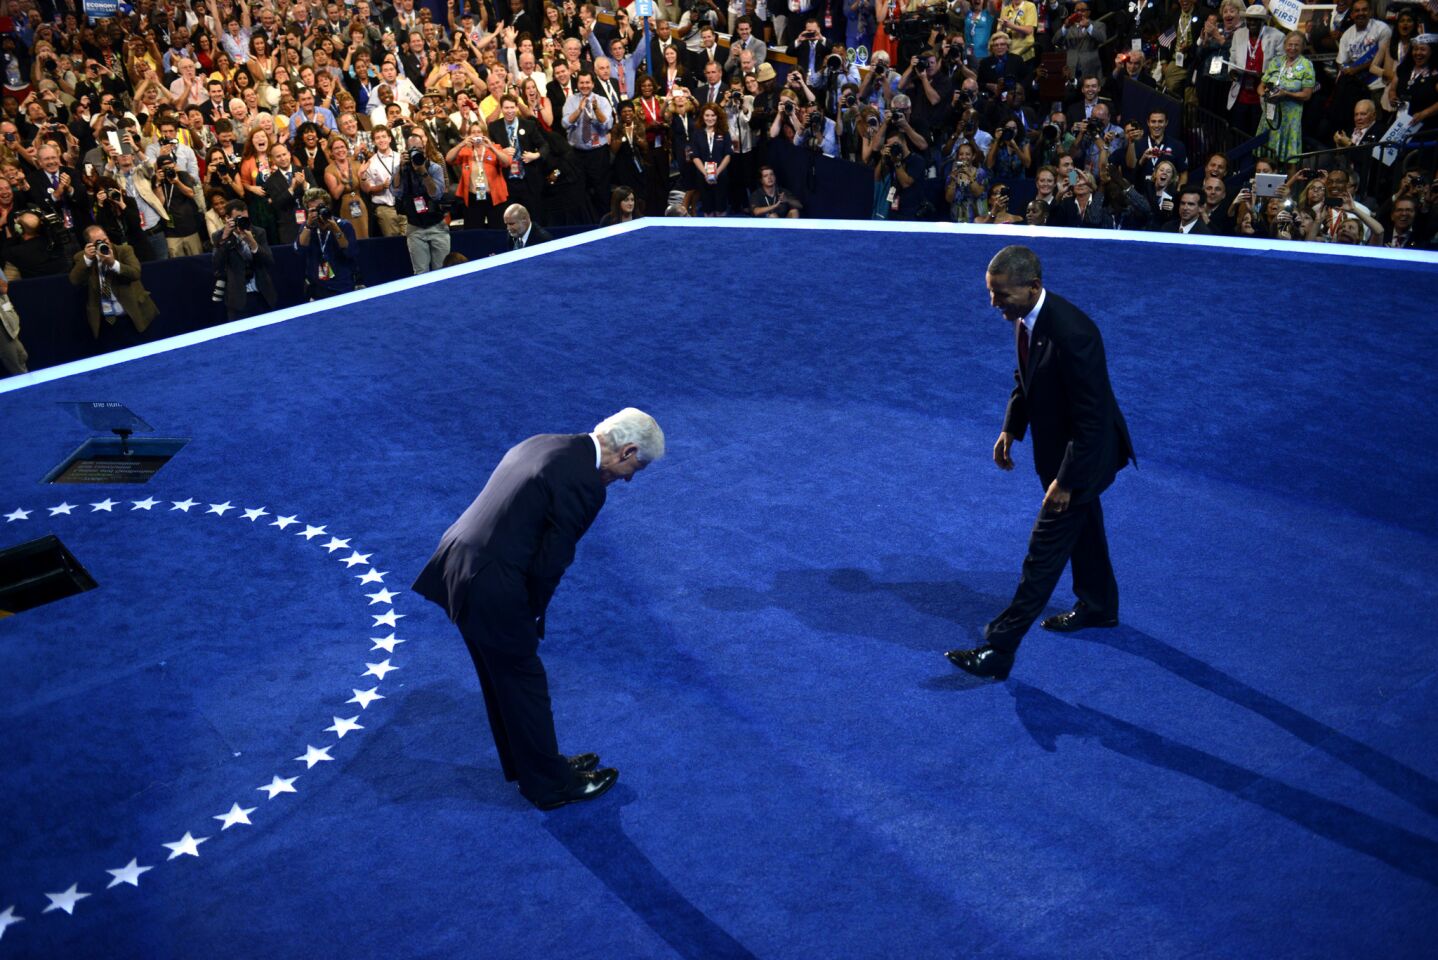 The 42nd President of the U.S., Bill Clinton bows to the 44th President of the U.S. Barack Obama in Charlotte, N.C. on the second day of the Democratic National Convention.